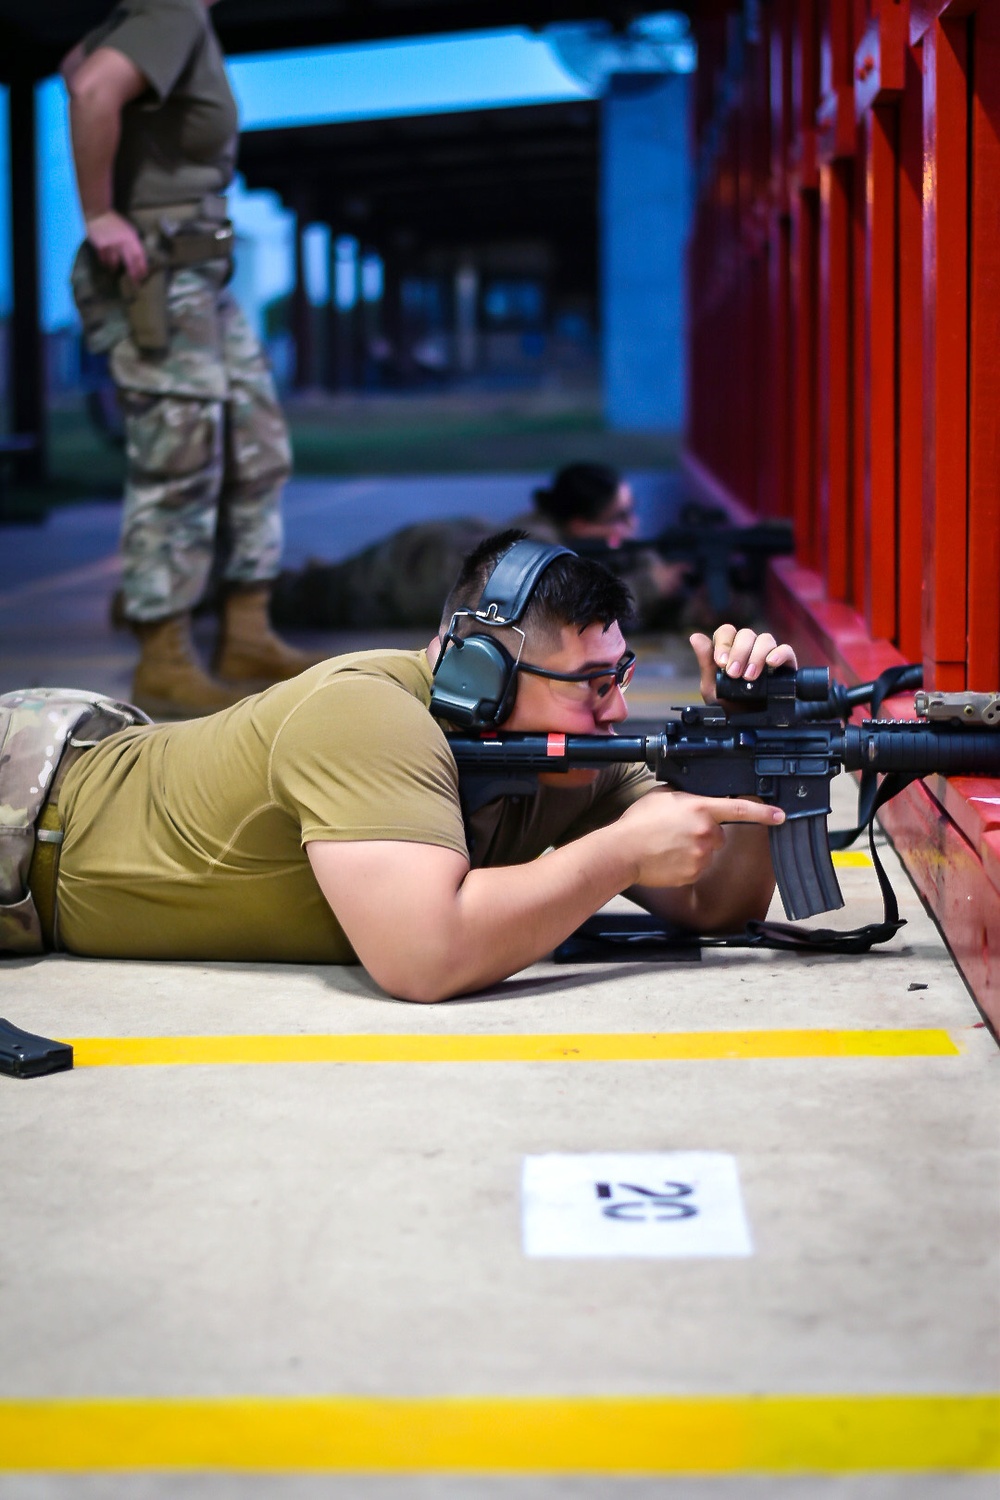 149th SFS conduct weapons training